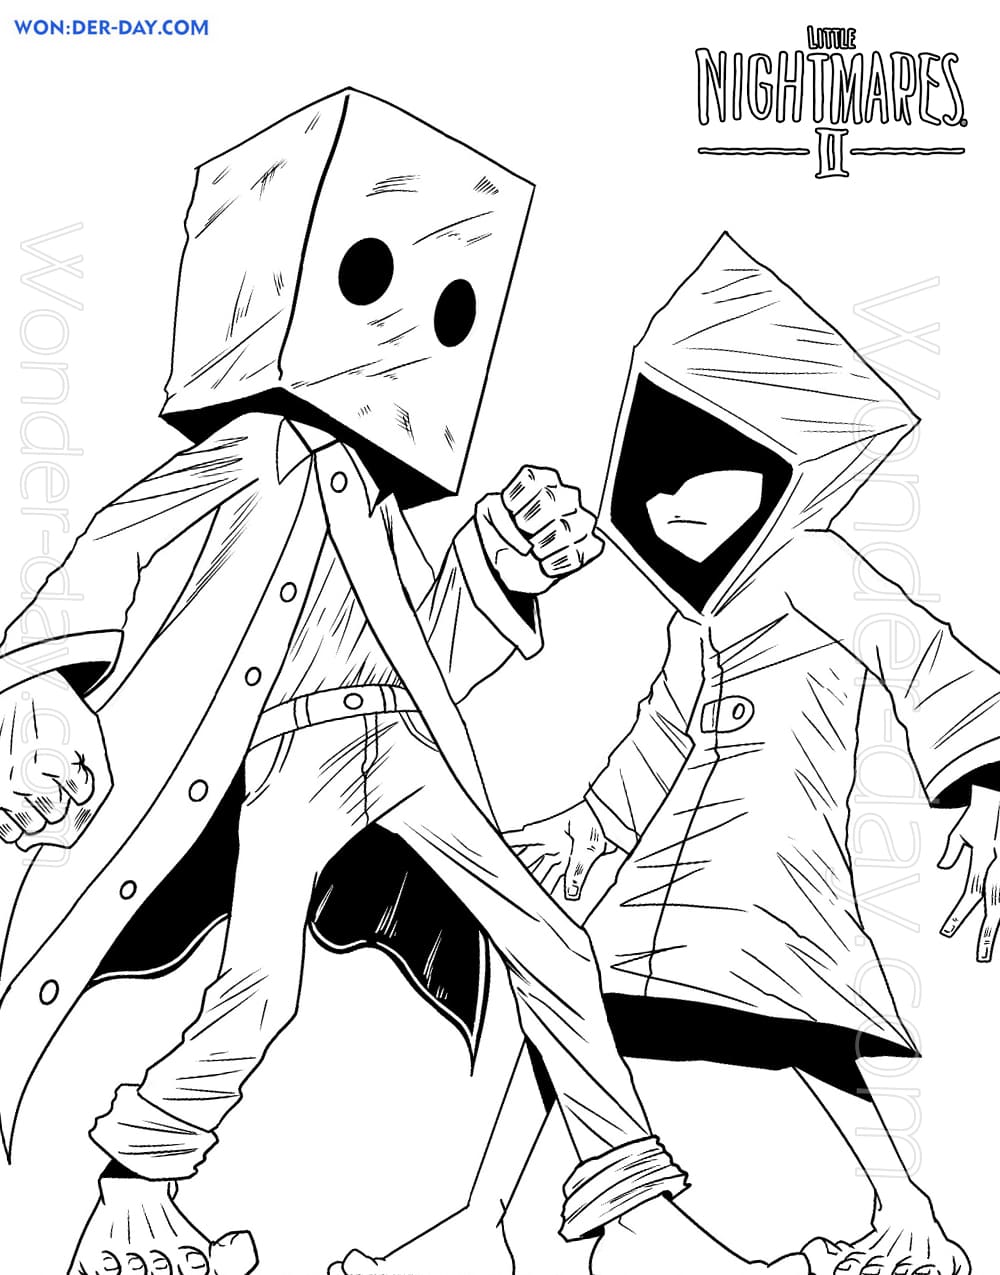 Little Nightmares Coloring Pages - Printable Coloring Pages